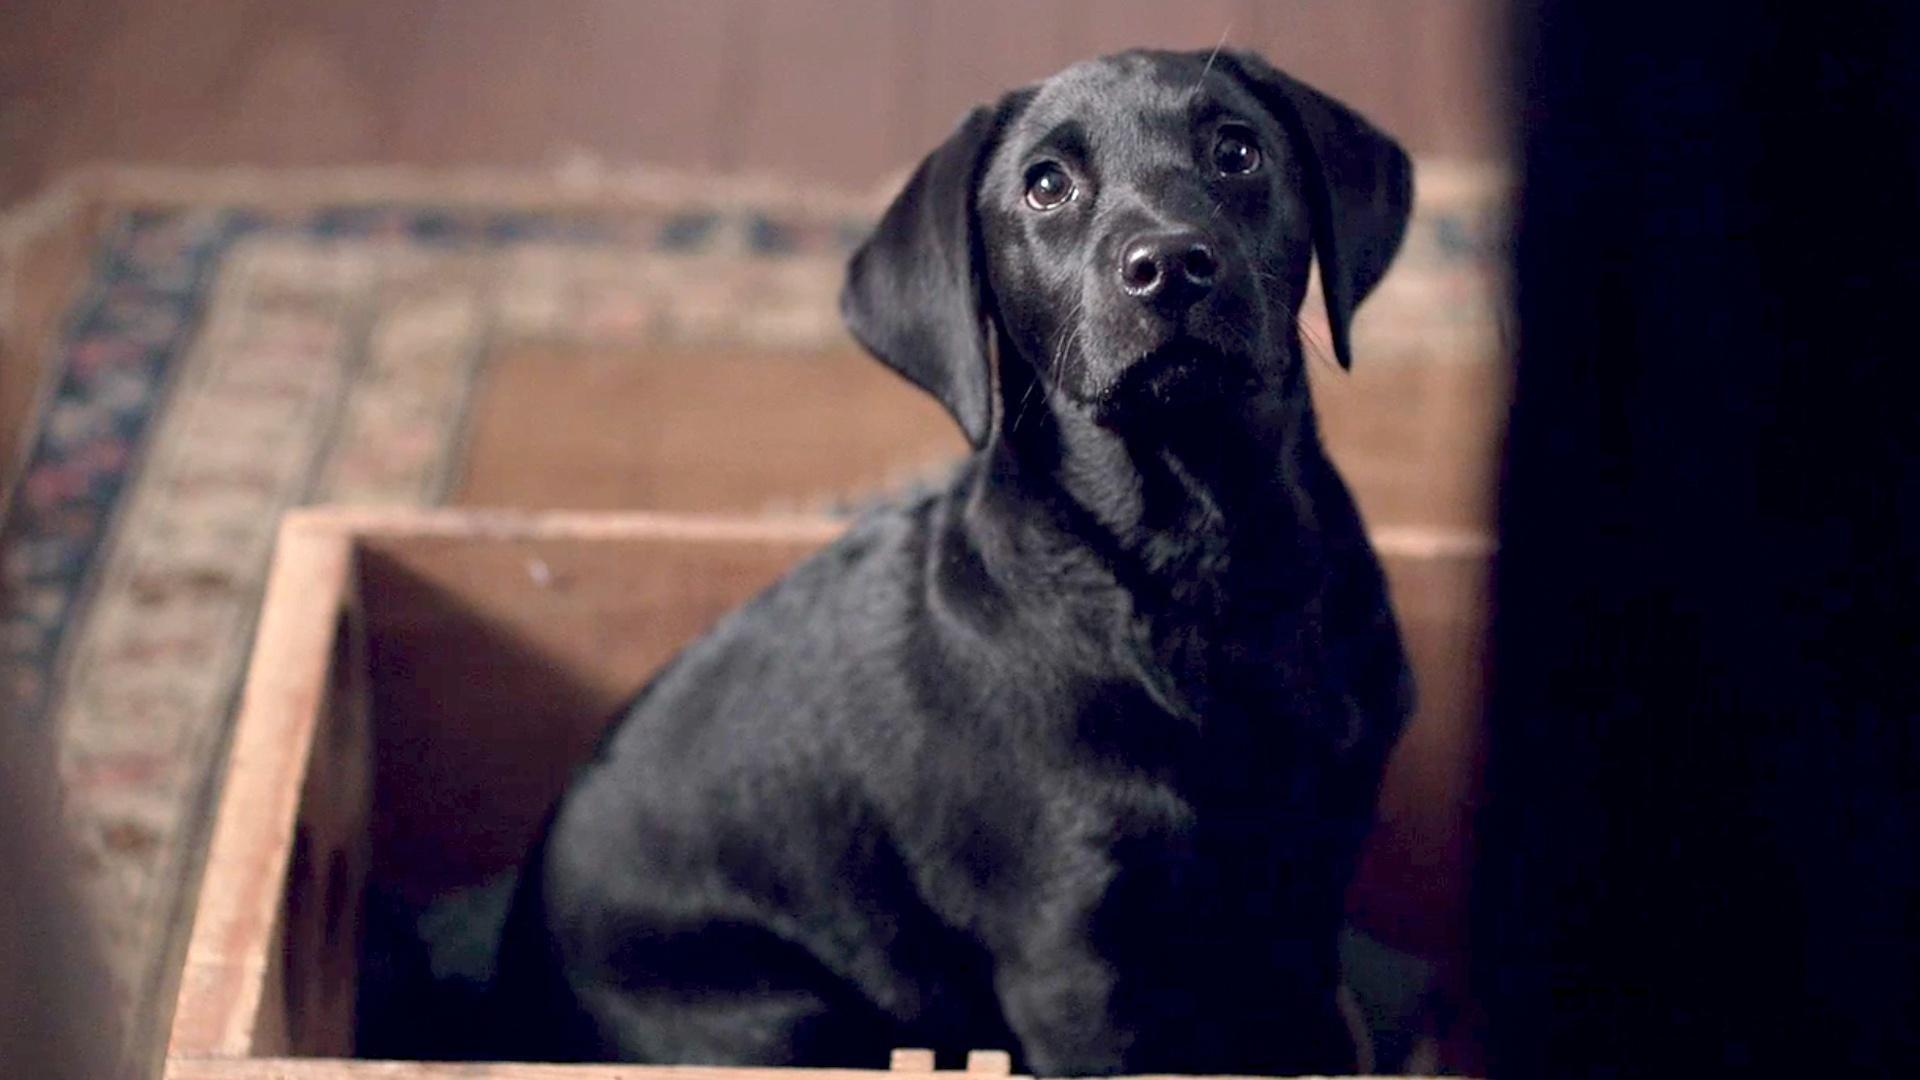 A black Labrador named Dickens from the show "Grantchester."